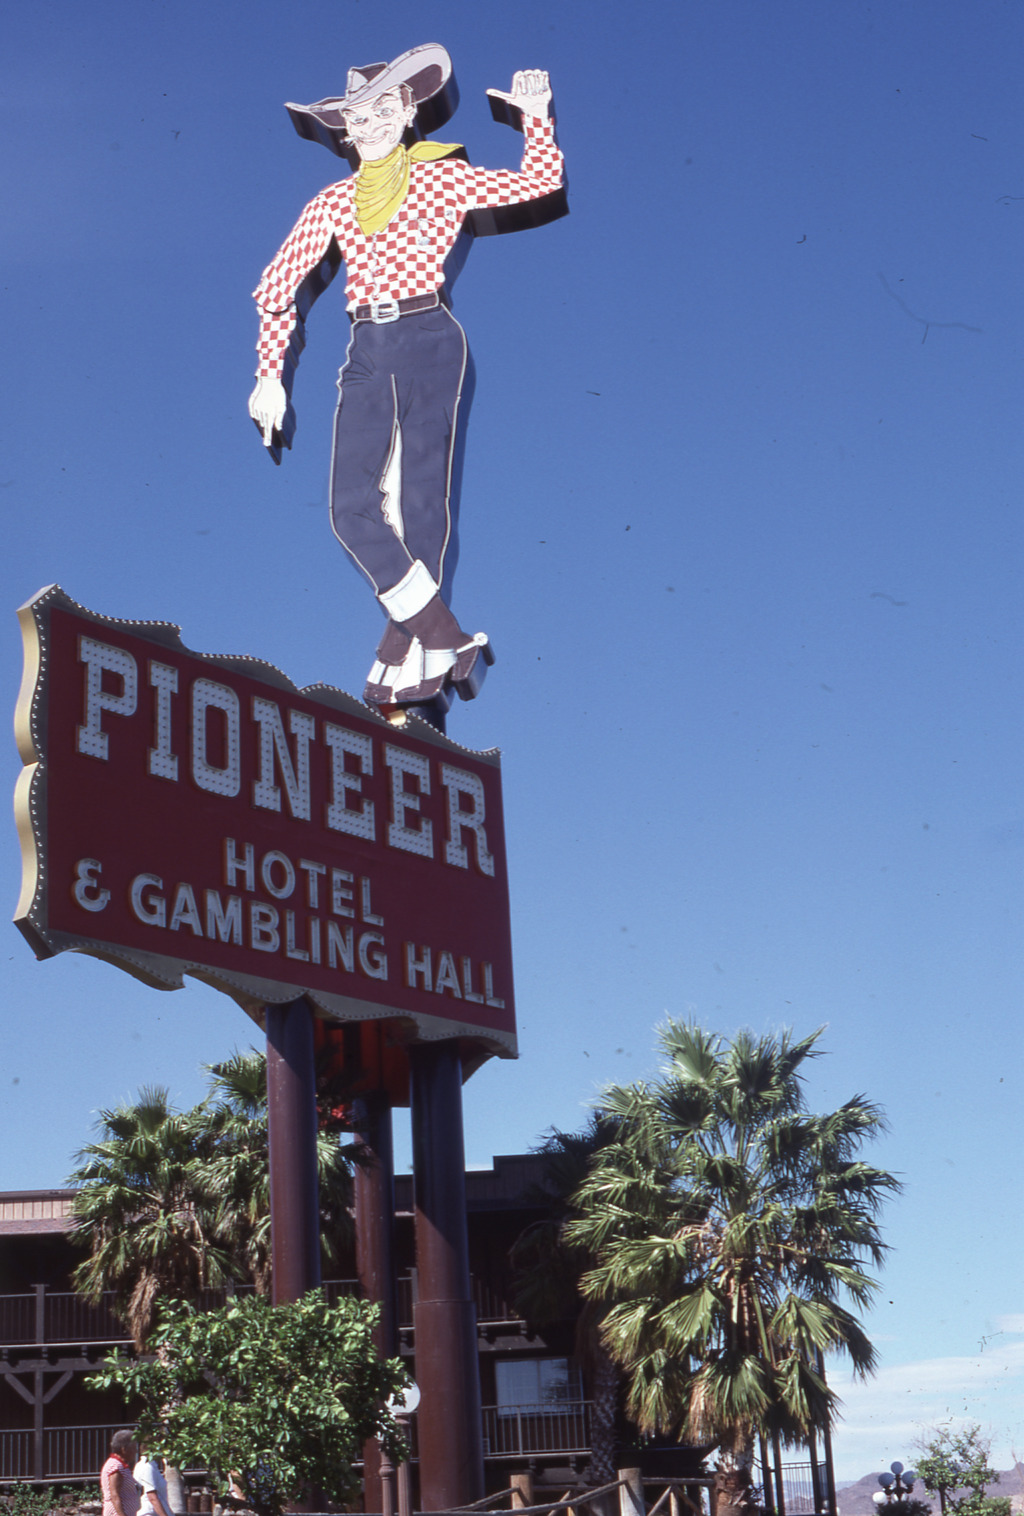 Pioneer Hotel and Gambling Hall double mounted pylon sign, Laughlin, Nevada: photographic print